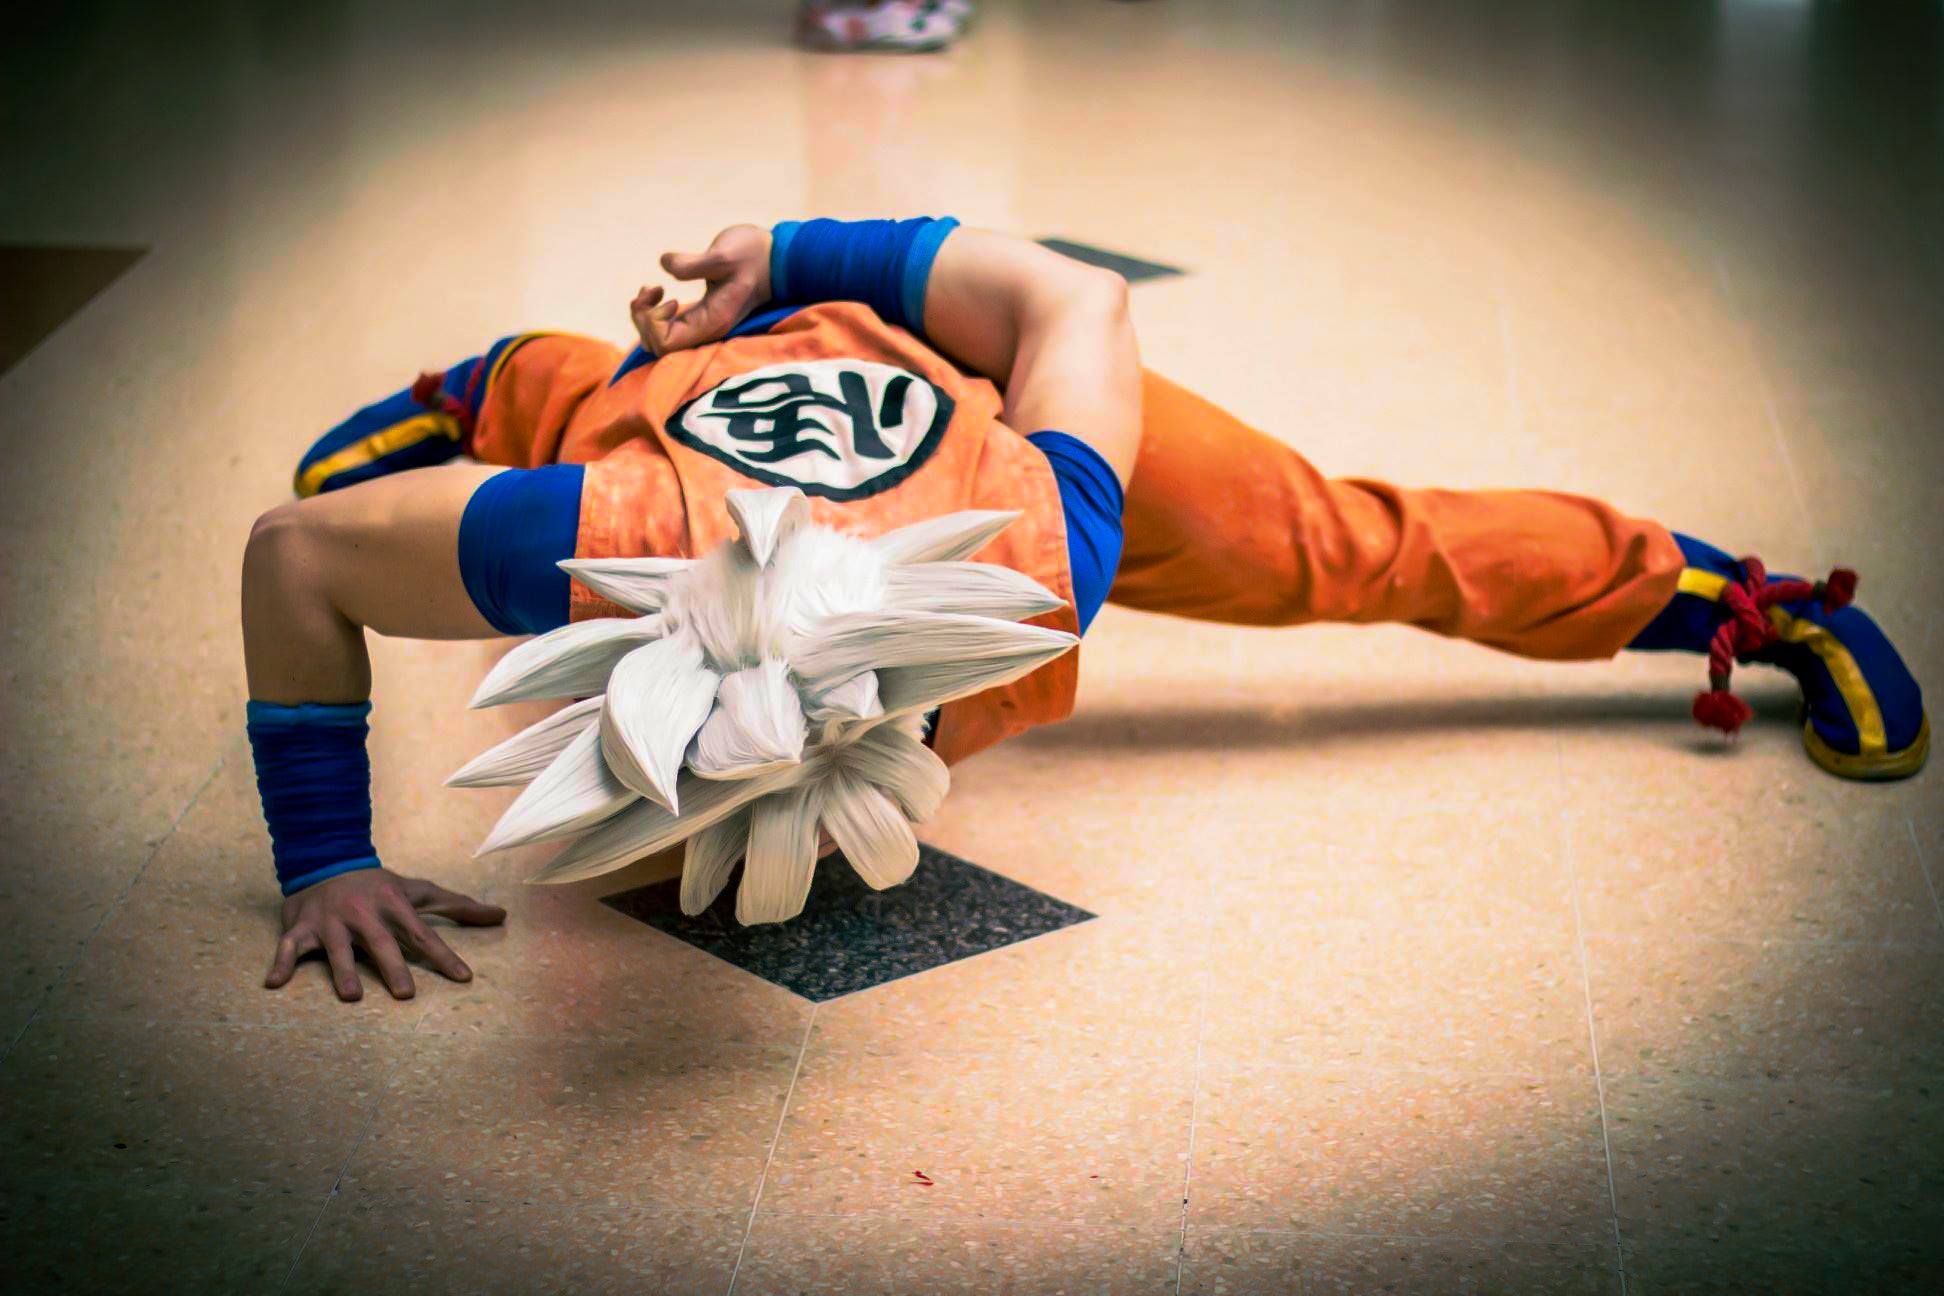 How to train like Goku in real life: combining strength training and callisthenics anime style for cosplay fitness